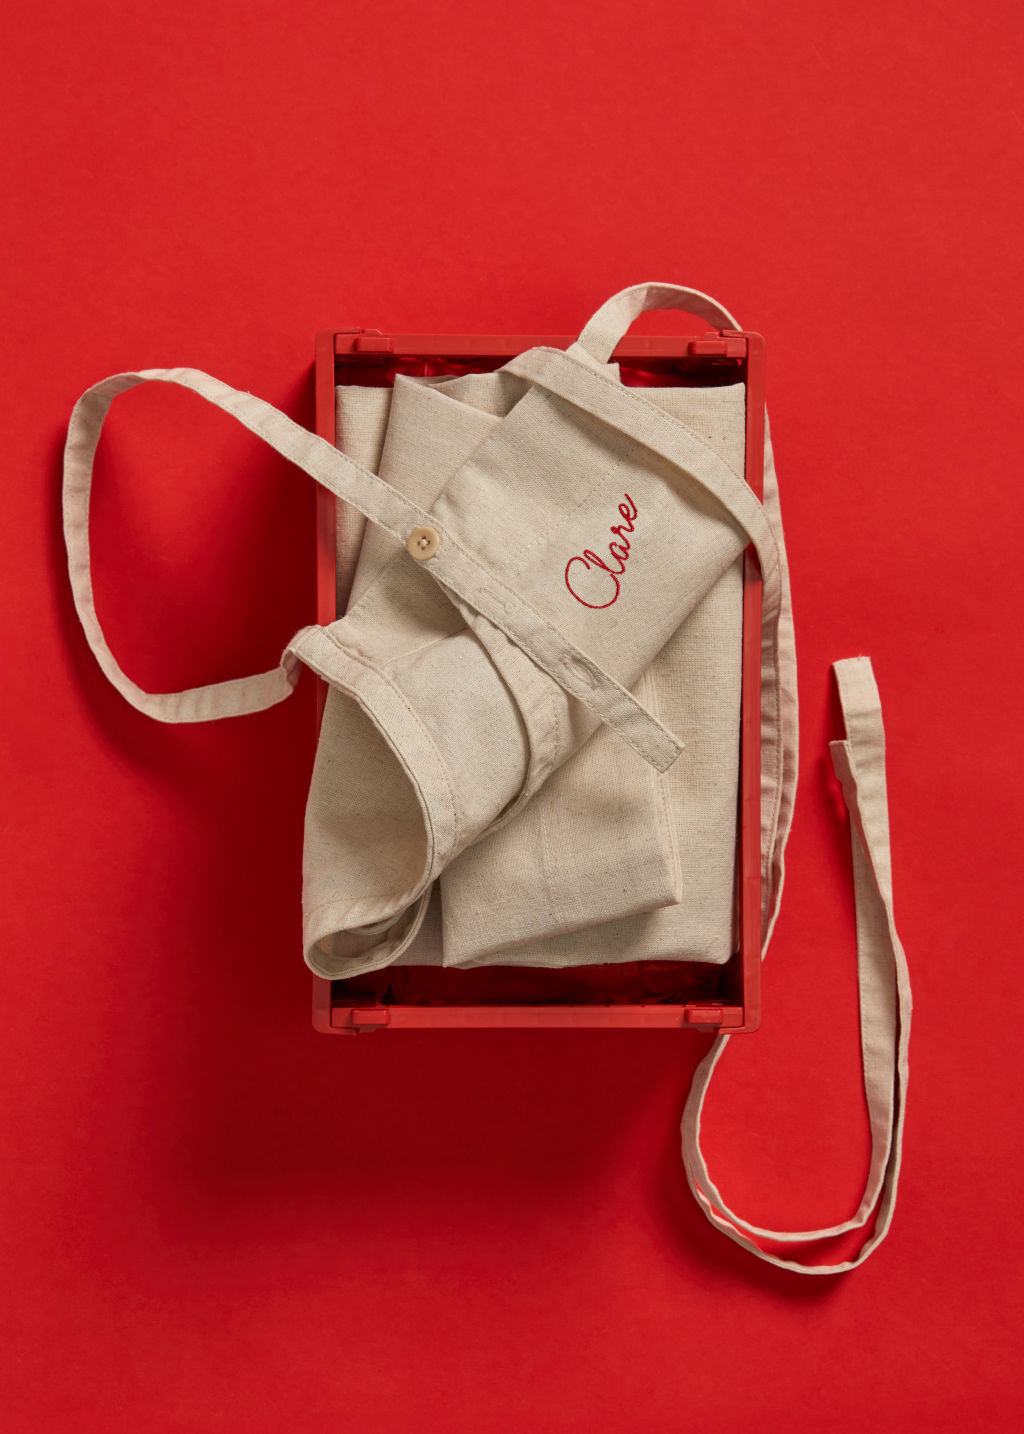 The Conscious Collection apron by Cargo Crew is crafted from sustainable, recycled materials. Photo: Supplied